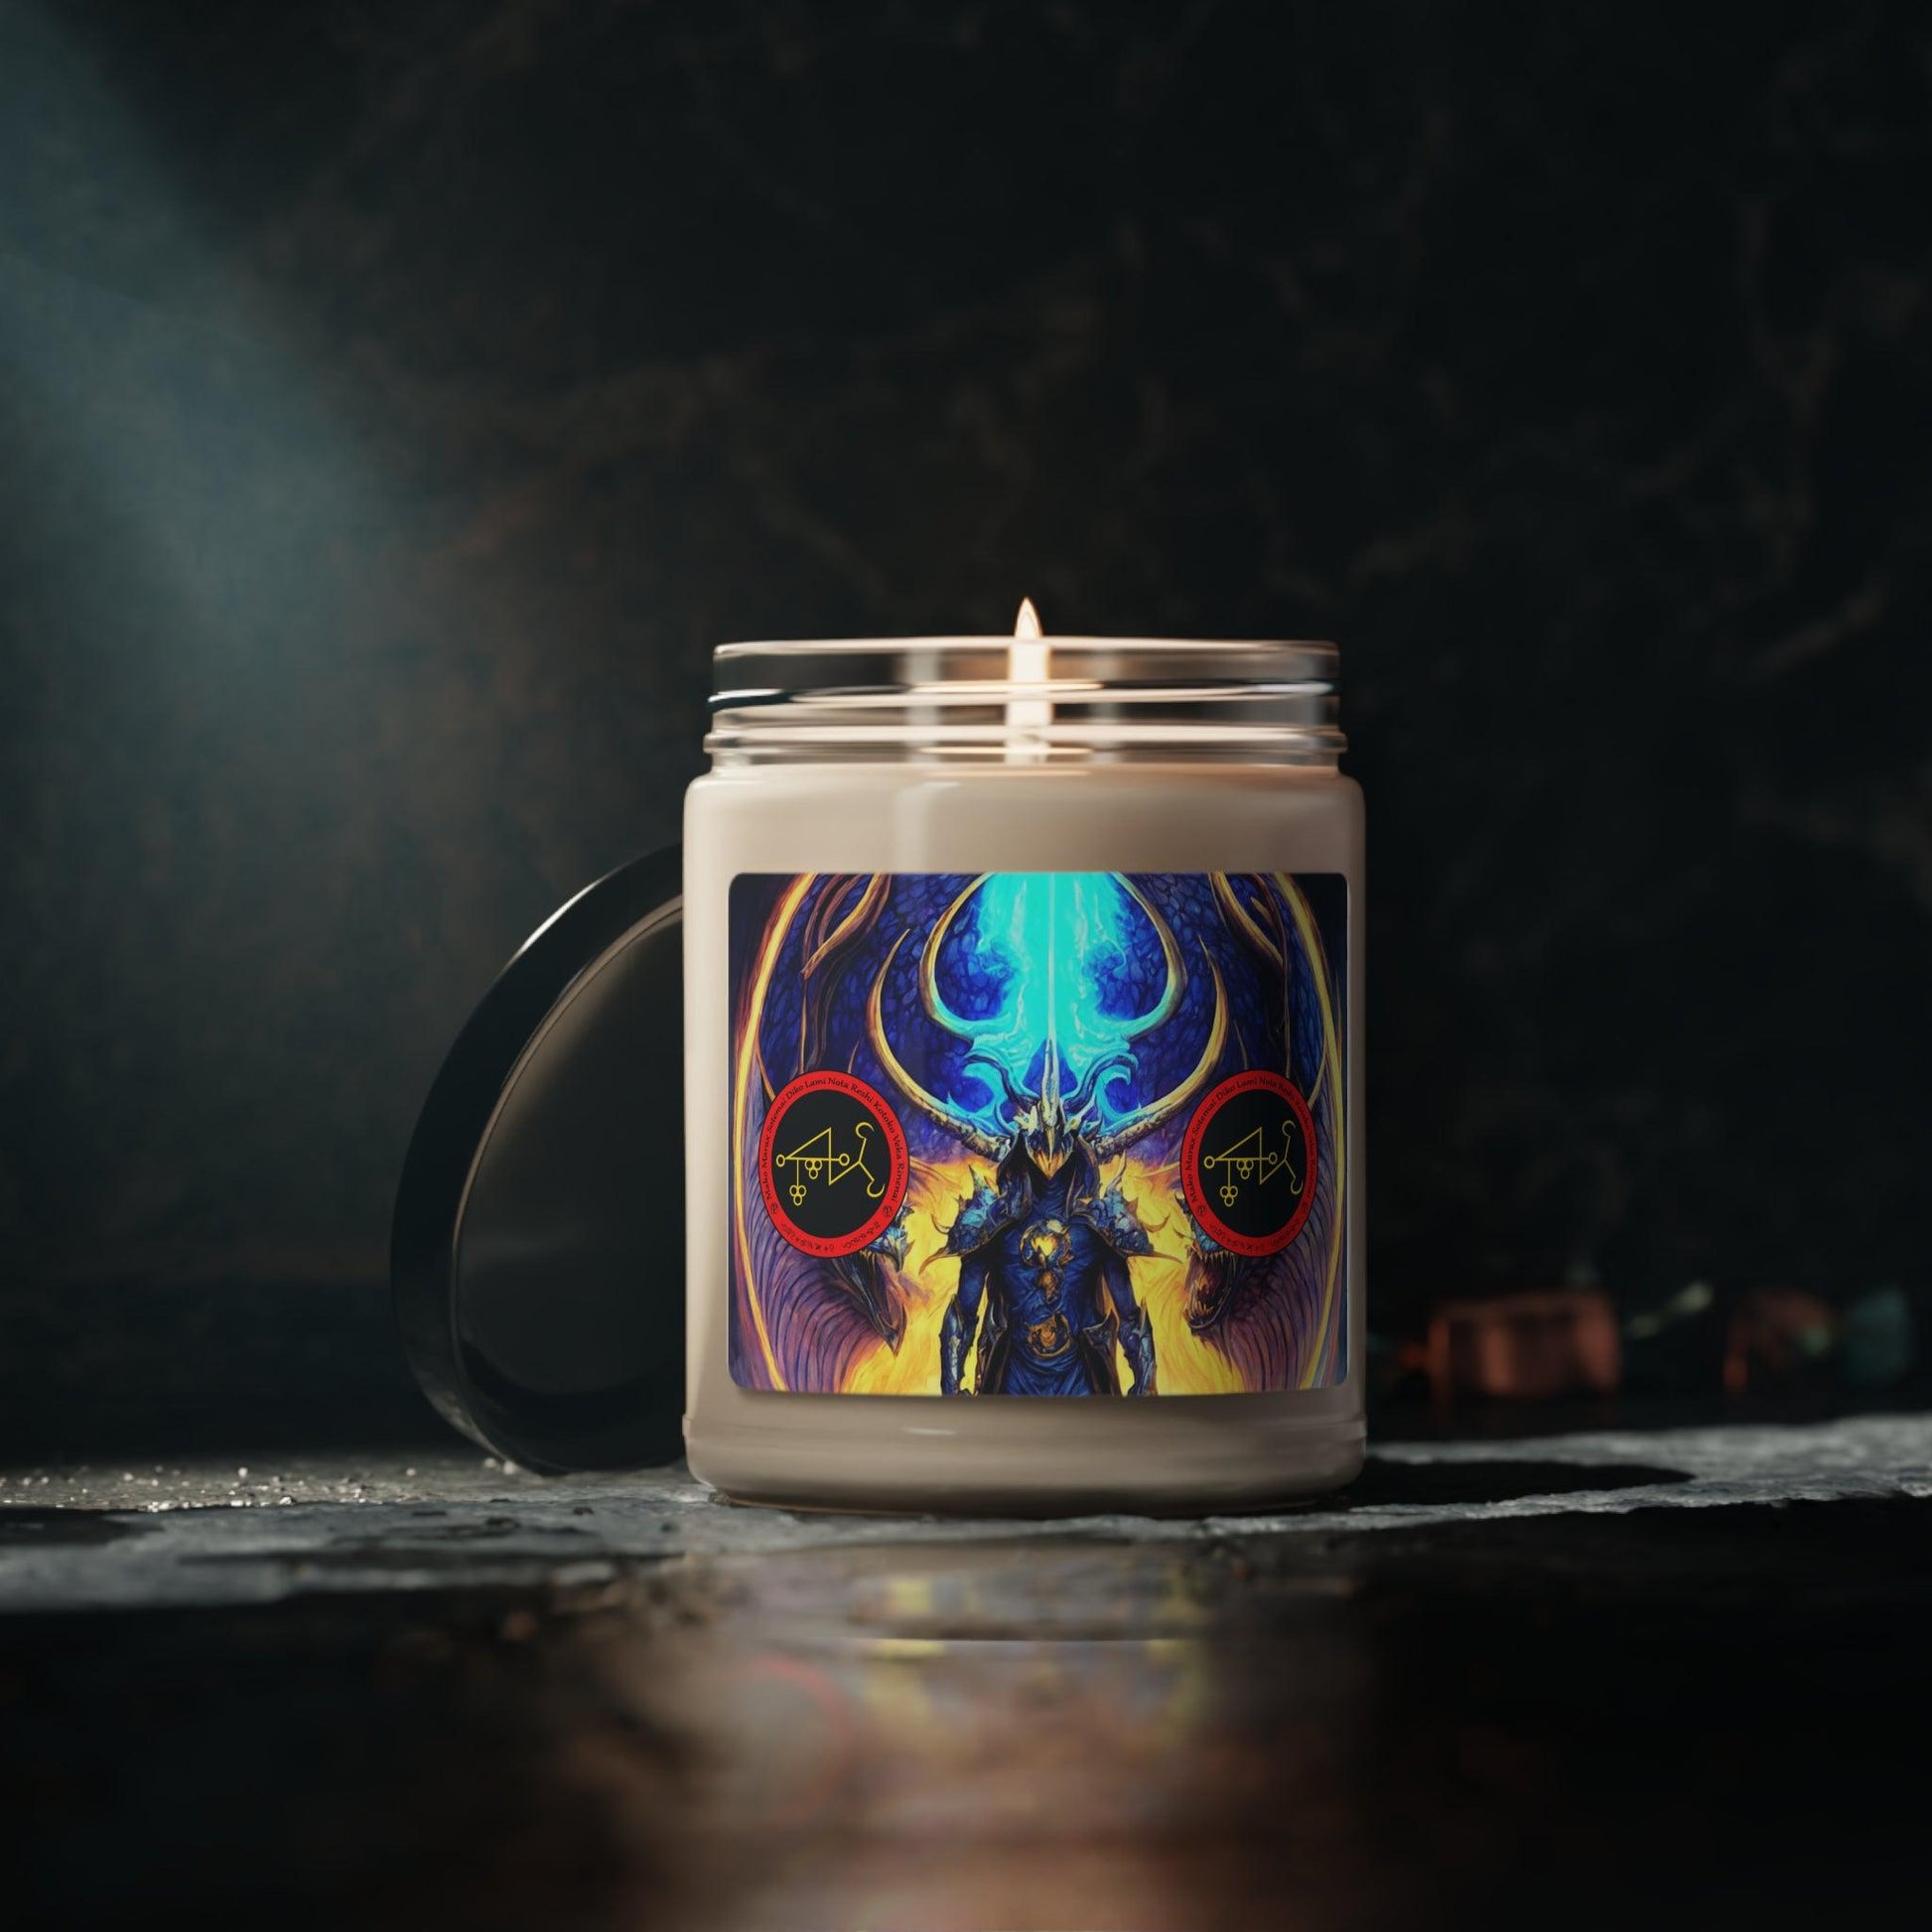 Demon-Marax-Altar-Scented-Soyed-Candle-To-Learn-Magic-and-witchcraft-in-προσφορές-τελετουργίες-μύηση-ή-προσευχή-και-διαλογισμός-15